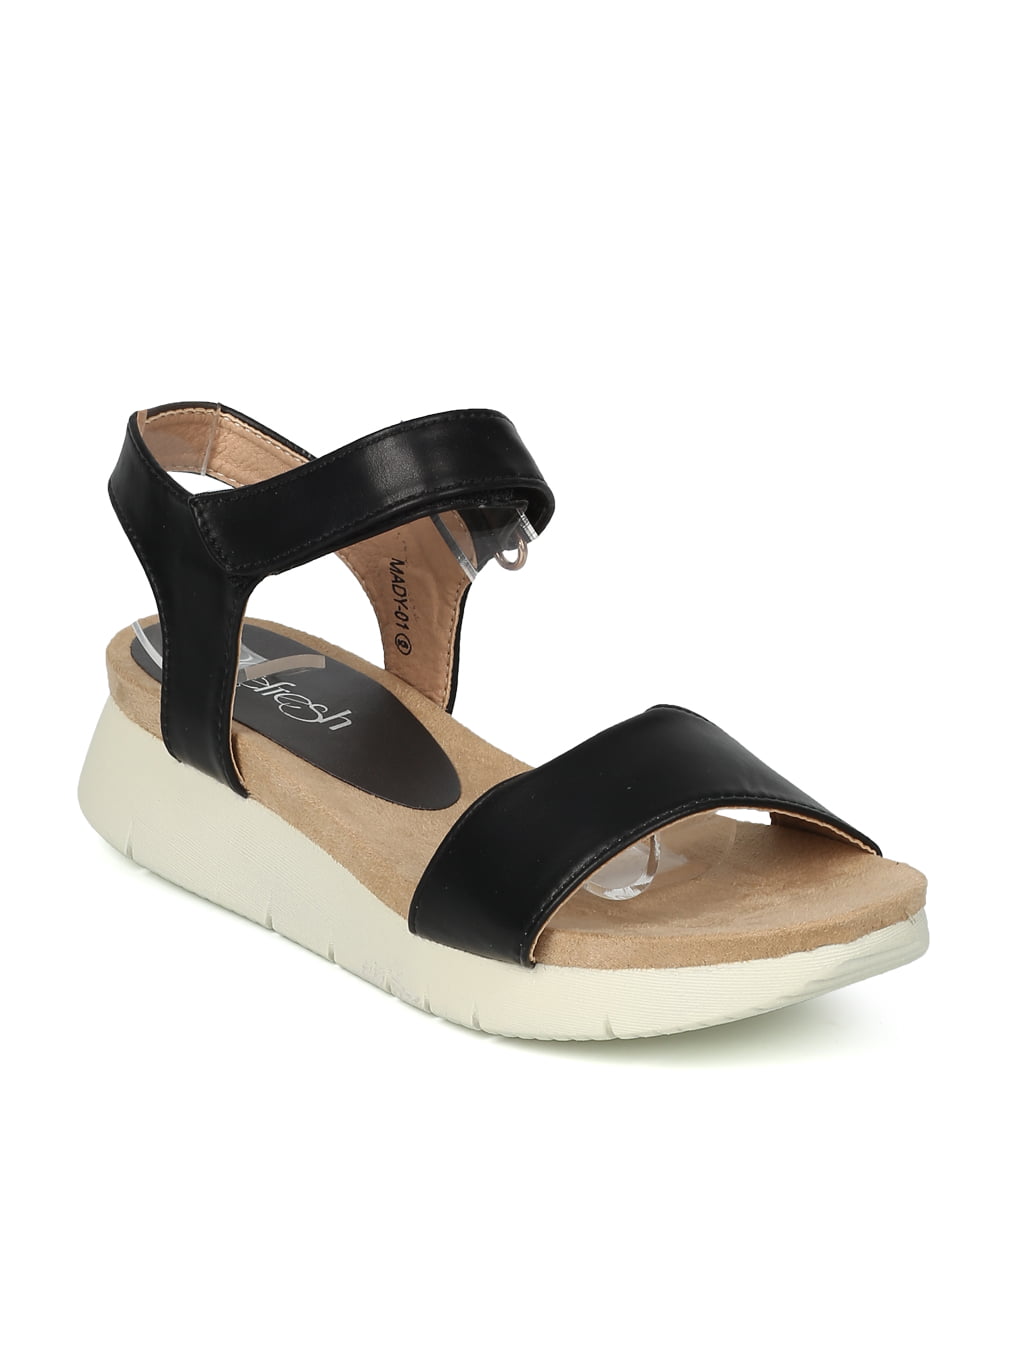 HH27 By Refresh New Women Open Toe Thick Soled Ankle Strap Comfort Sandal 